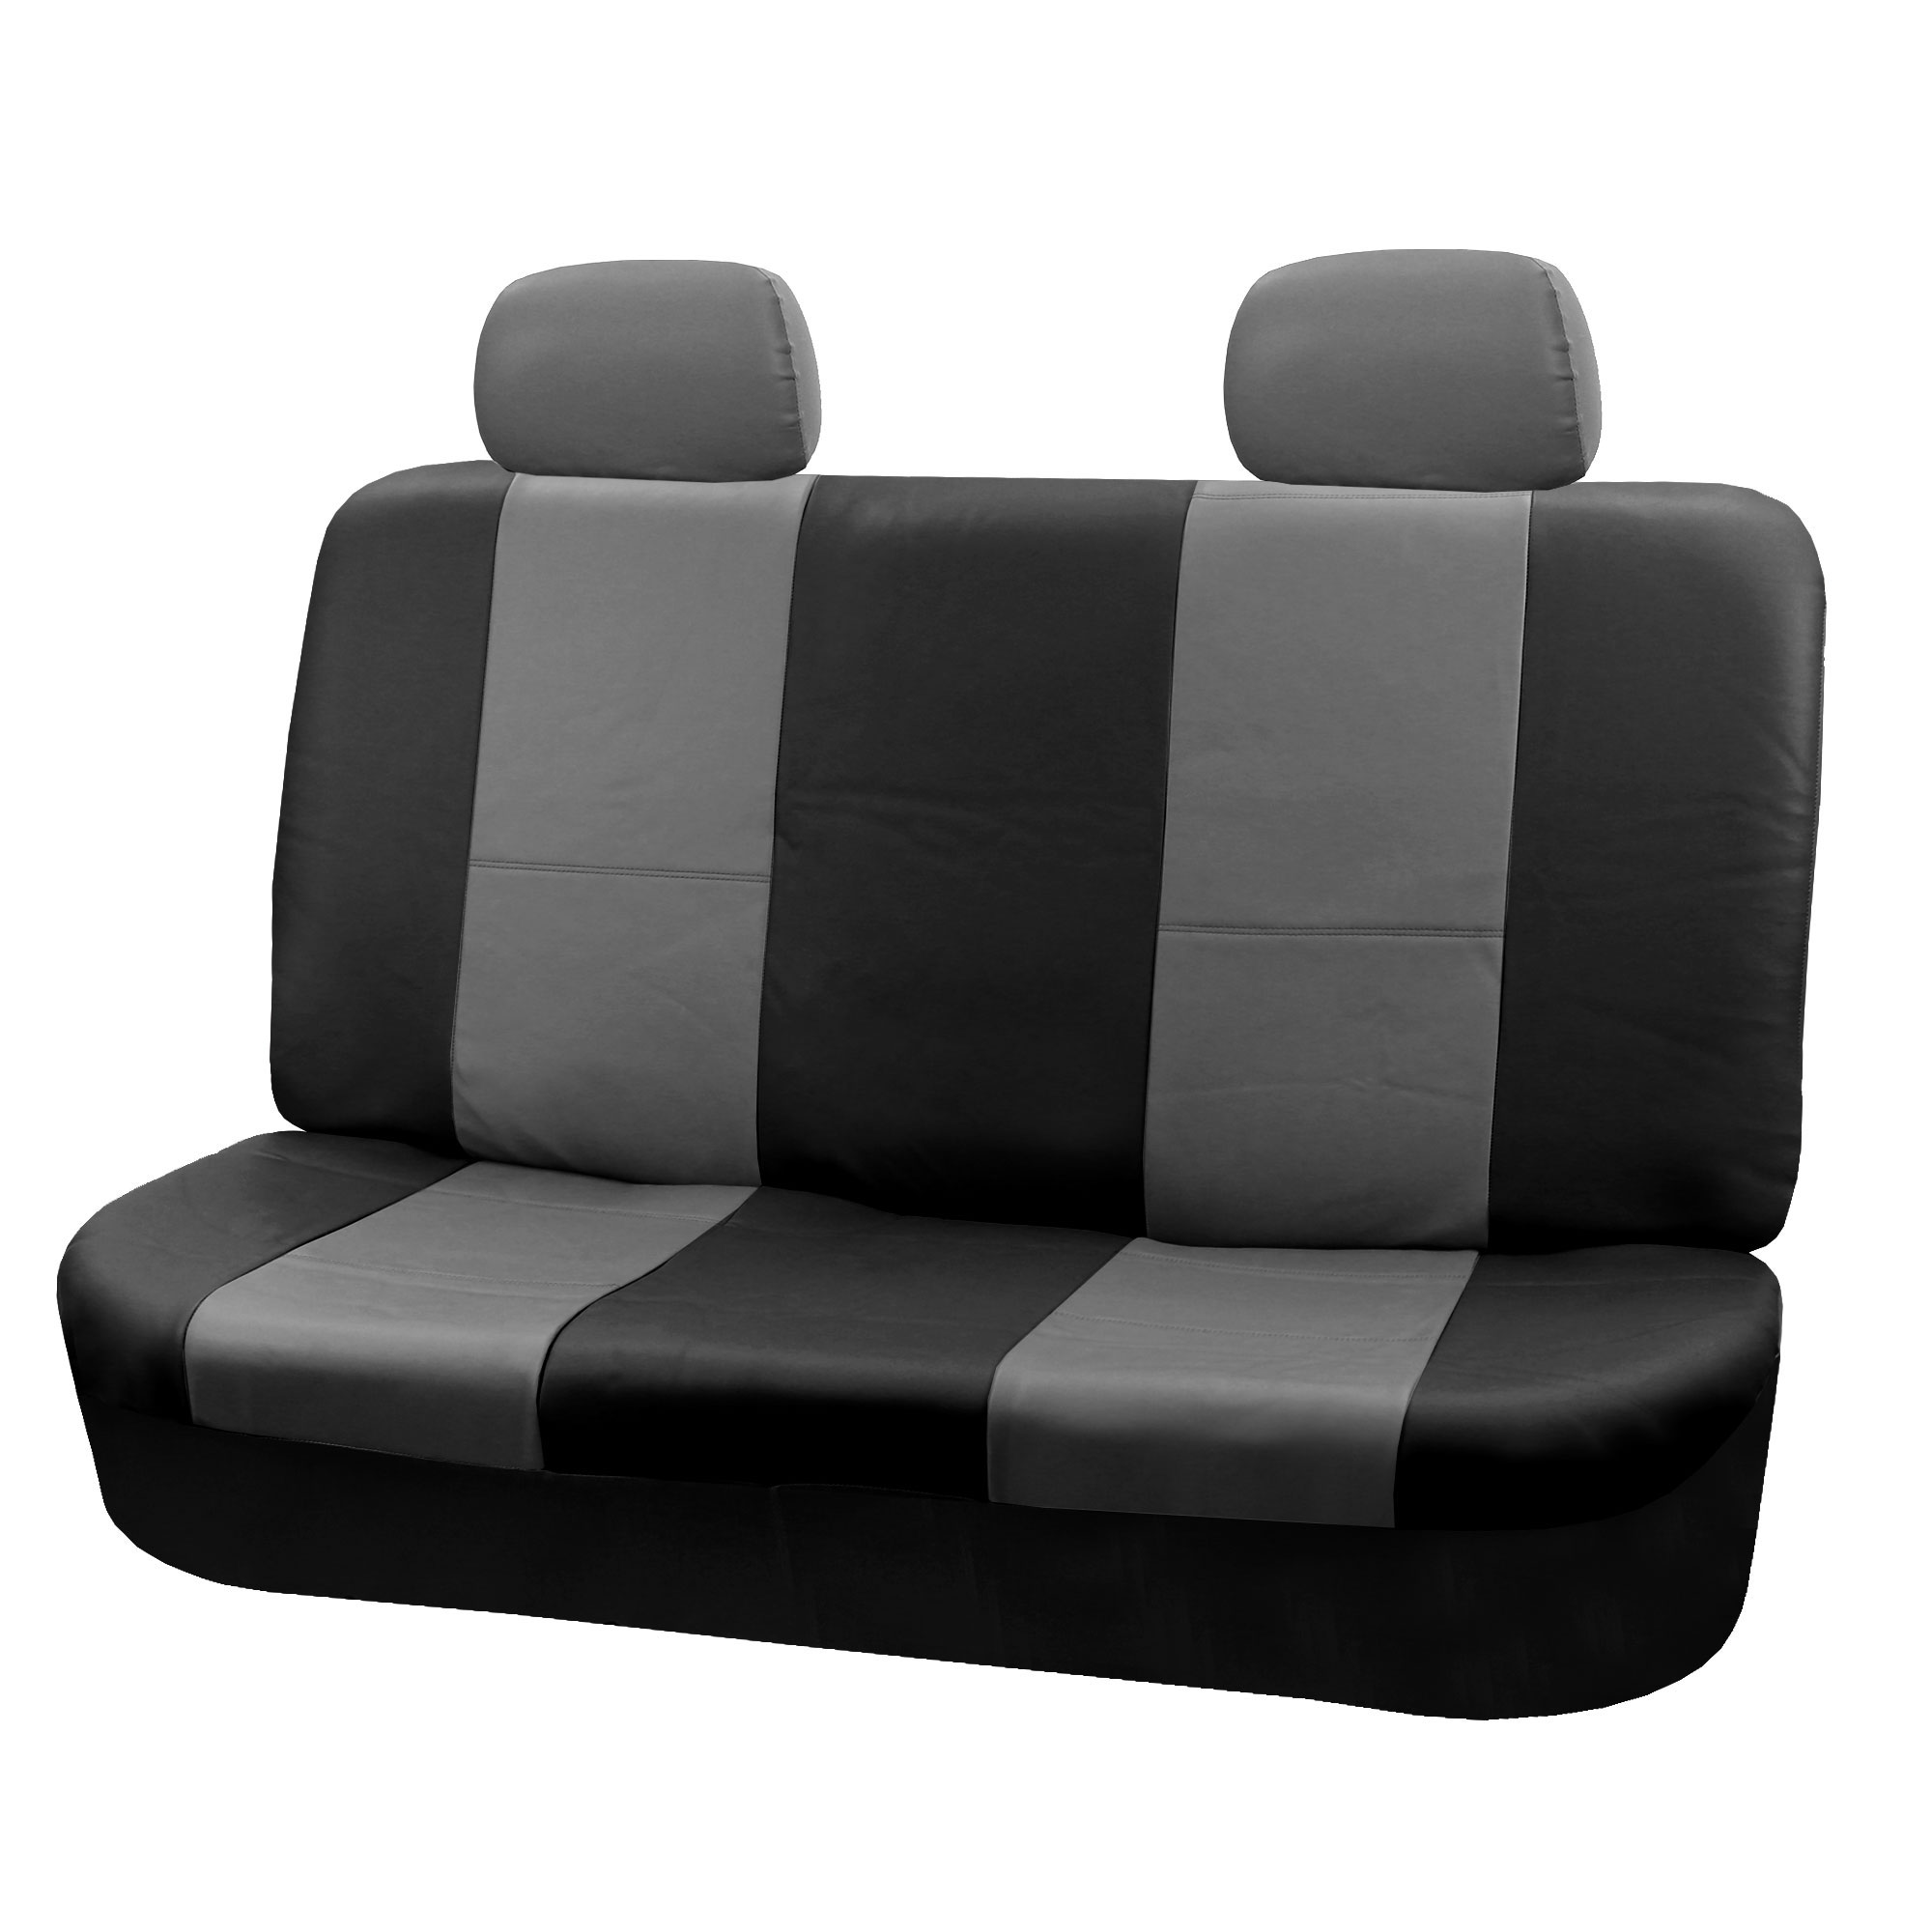 PU Leather Bucket Seat/Full Set Covers for Seats with Headrests | eBay